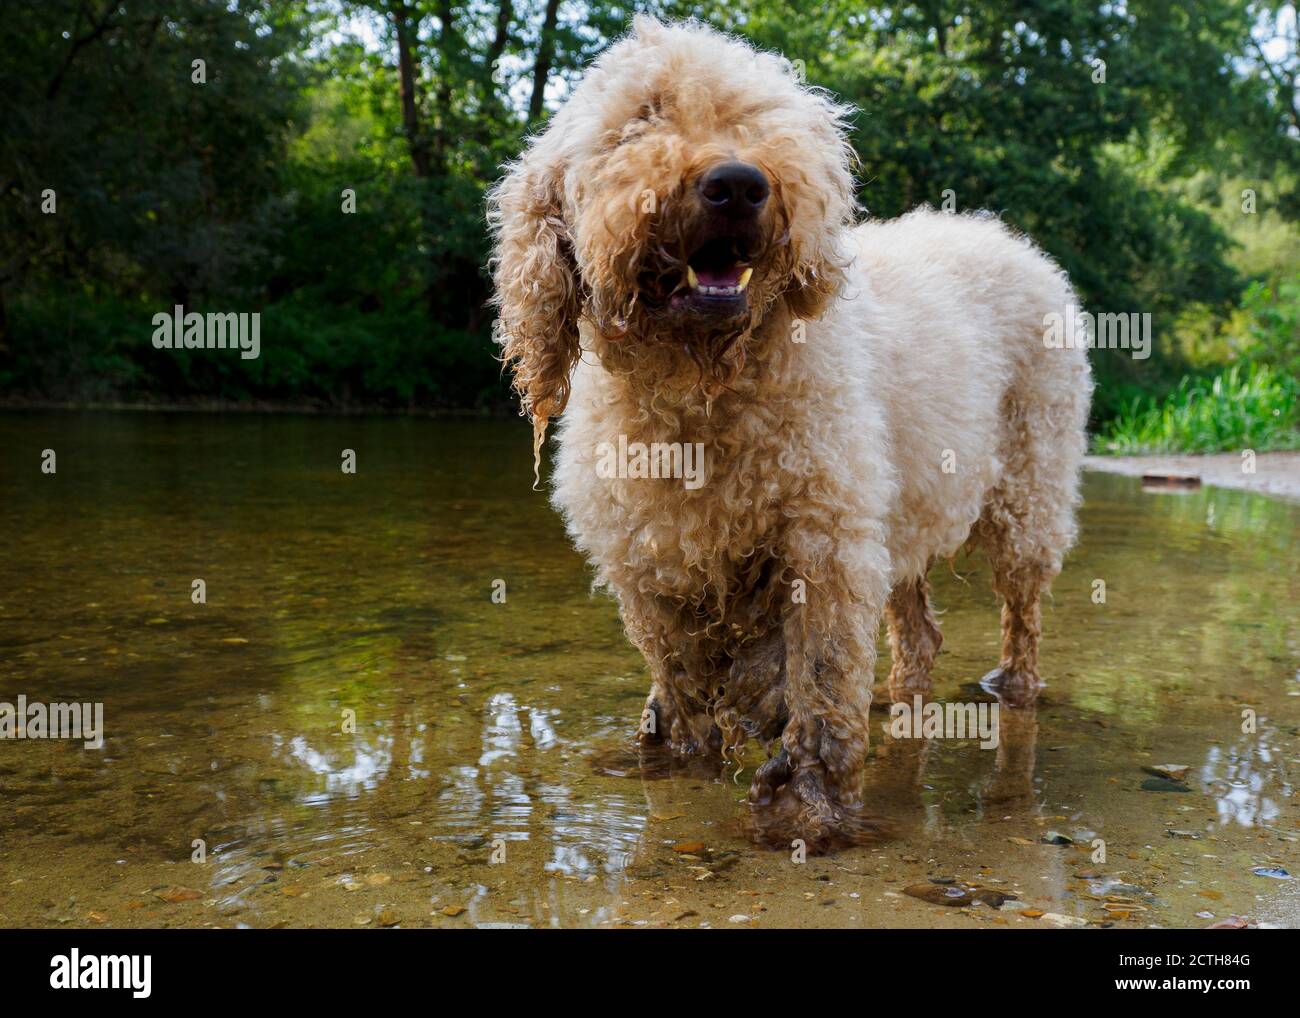 Lagotto Romagnolo dog standing in a river on a hot day, UK Stock Photo